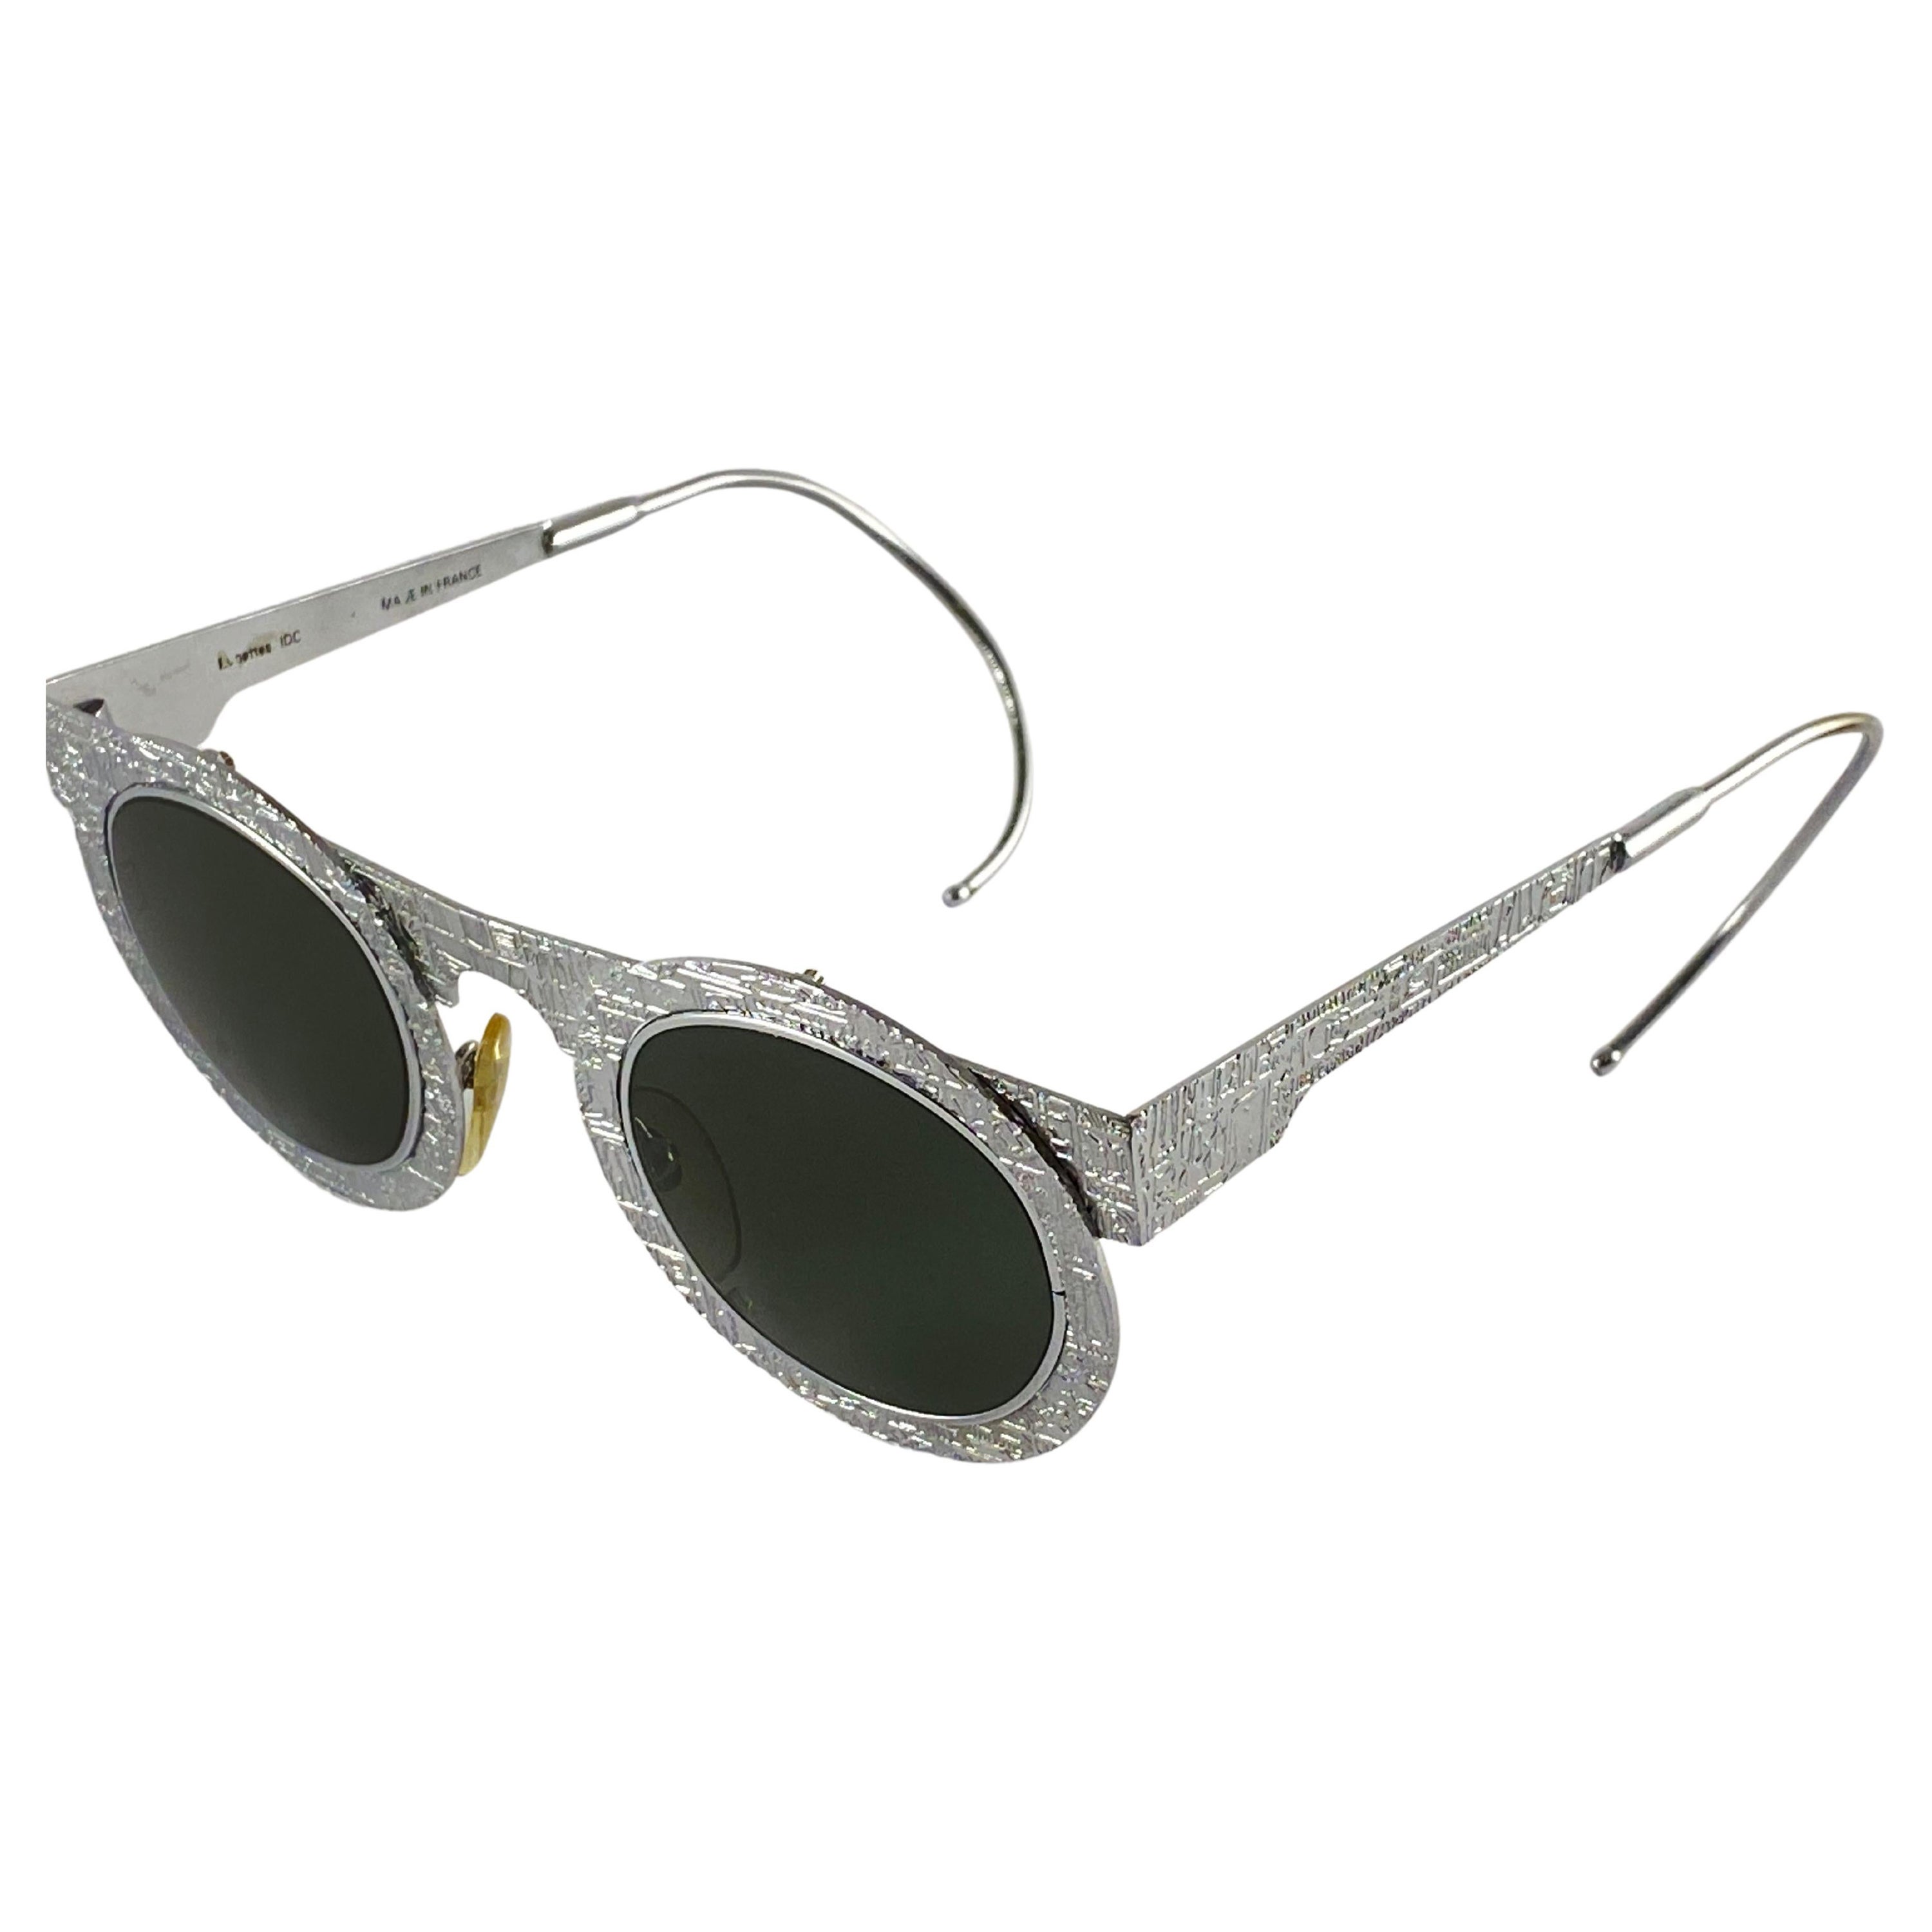 New Vintage IDC Pour Marithe Francois Girbaud Round Silver Sunglasses France For Sale